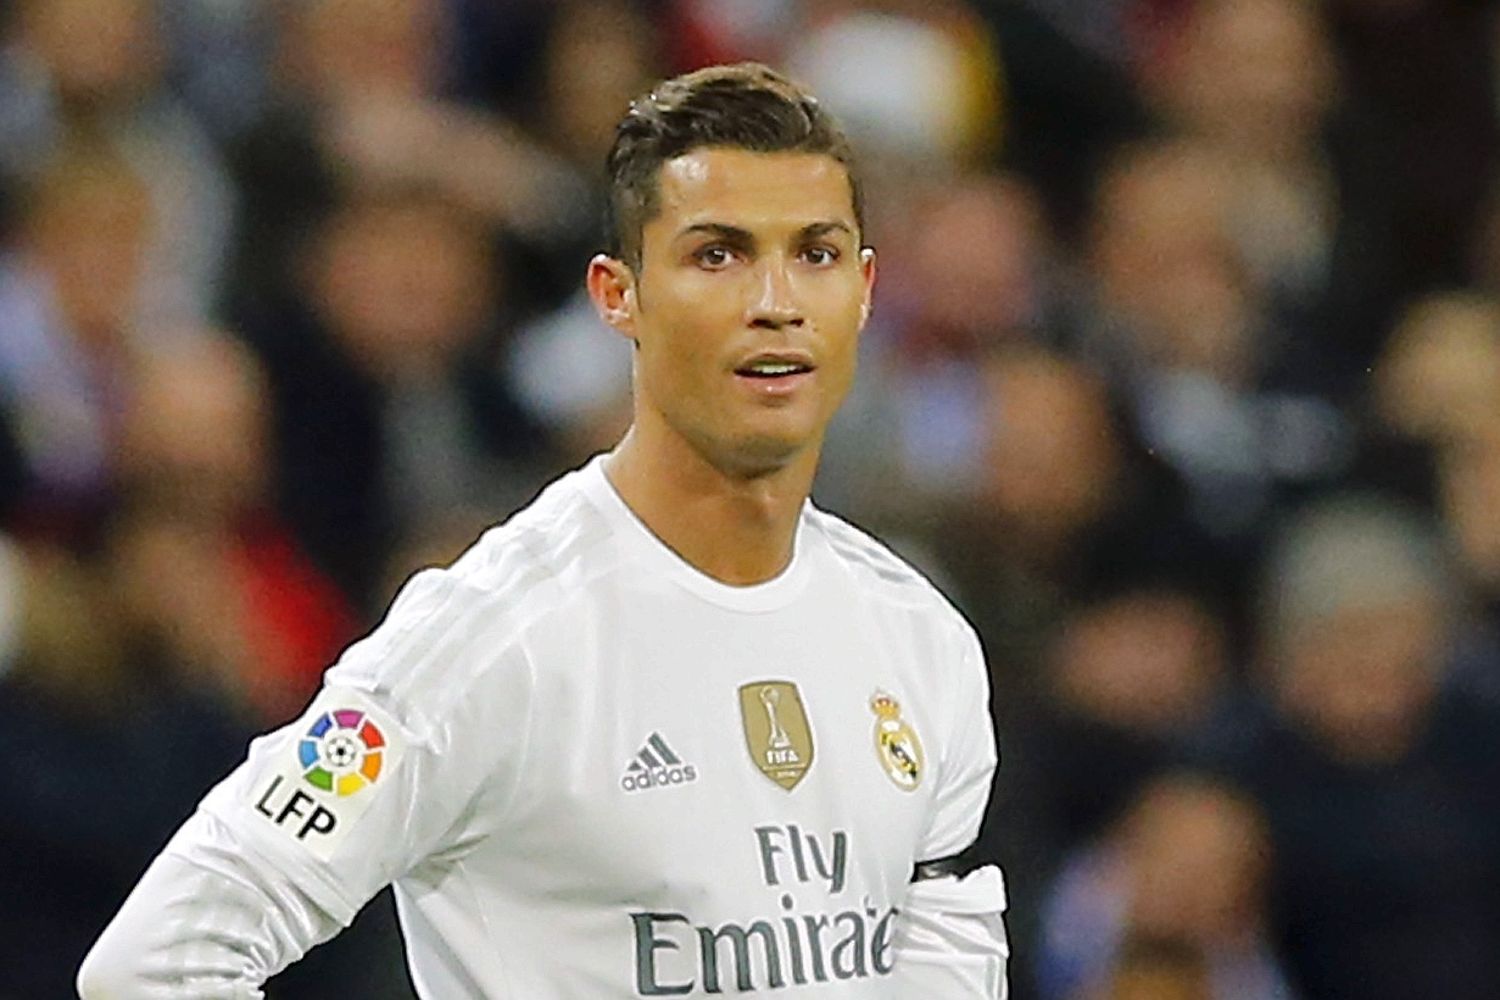 sr4 27112015 - Why is it a big risk for Cristiano Ronaldo to rejoin Manchester United